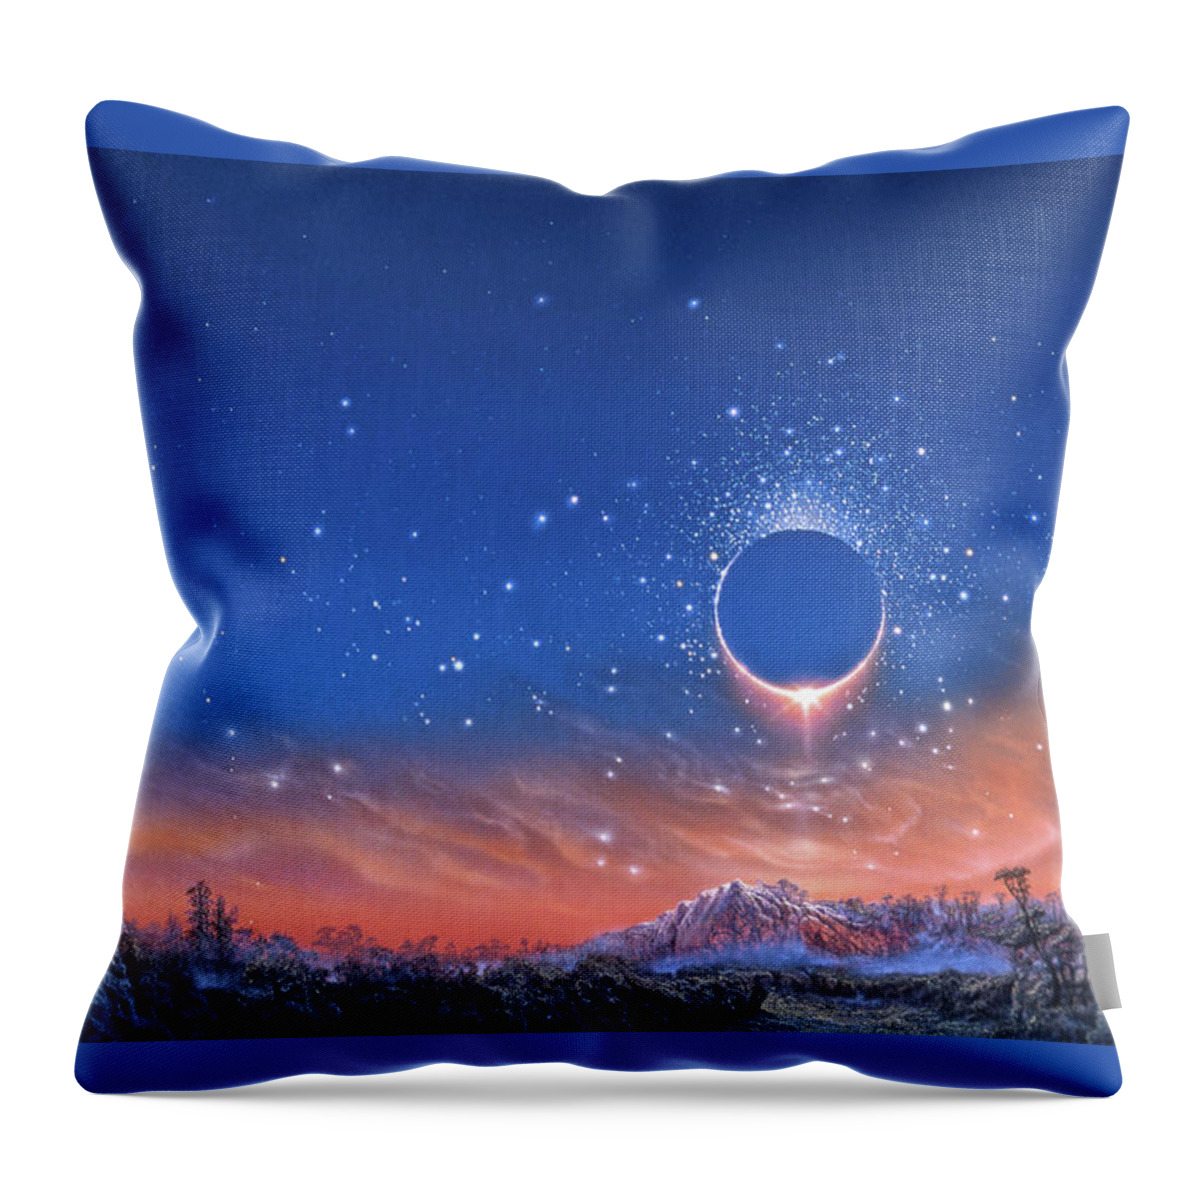 Nightfall Throw Pillow featuring the painting Nightfall by Don Dixon